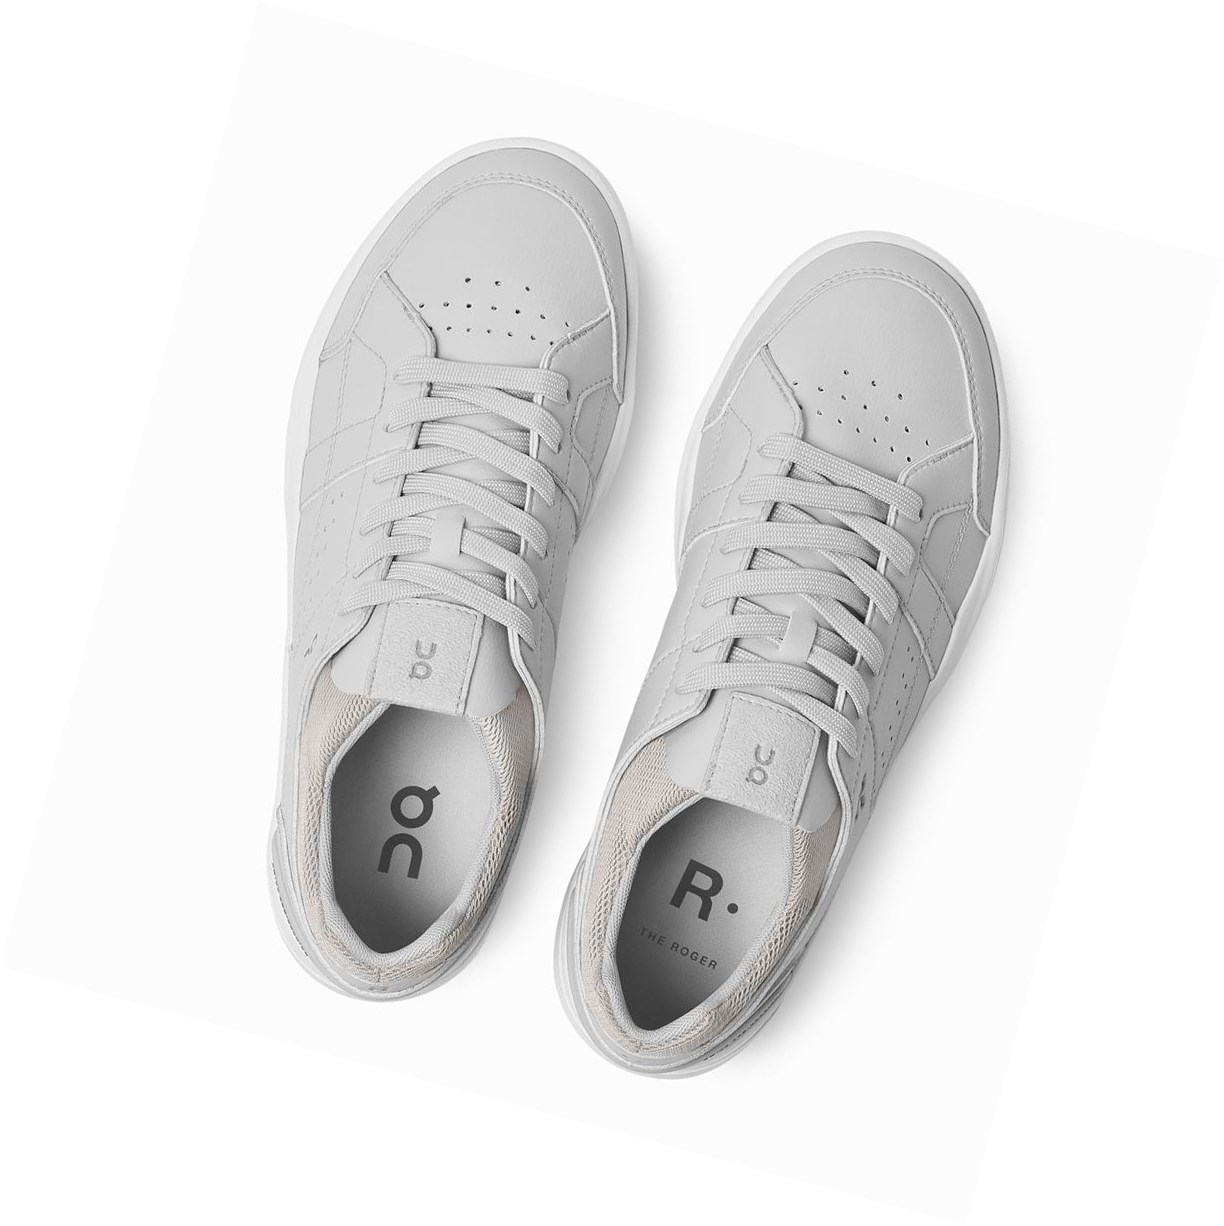 Zapatos Tenis On Outlet México - ROGER Clubhouse Hombre Blancos